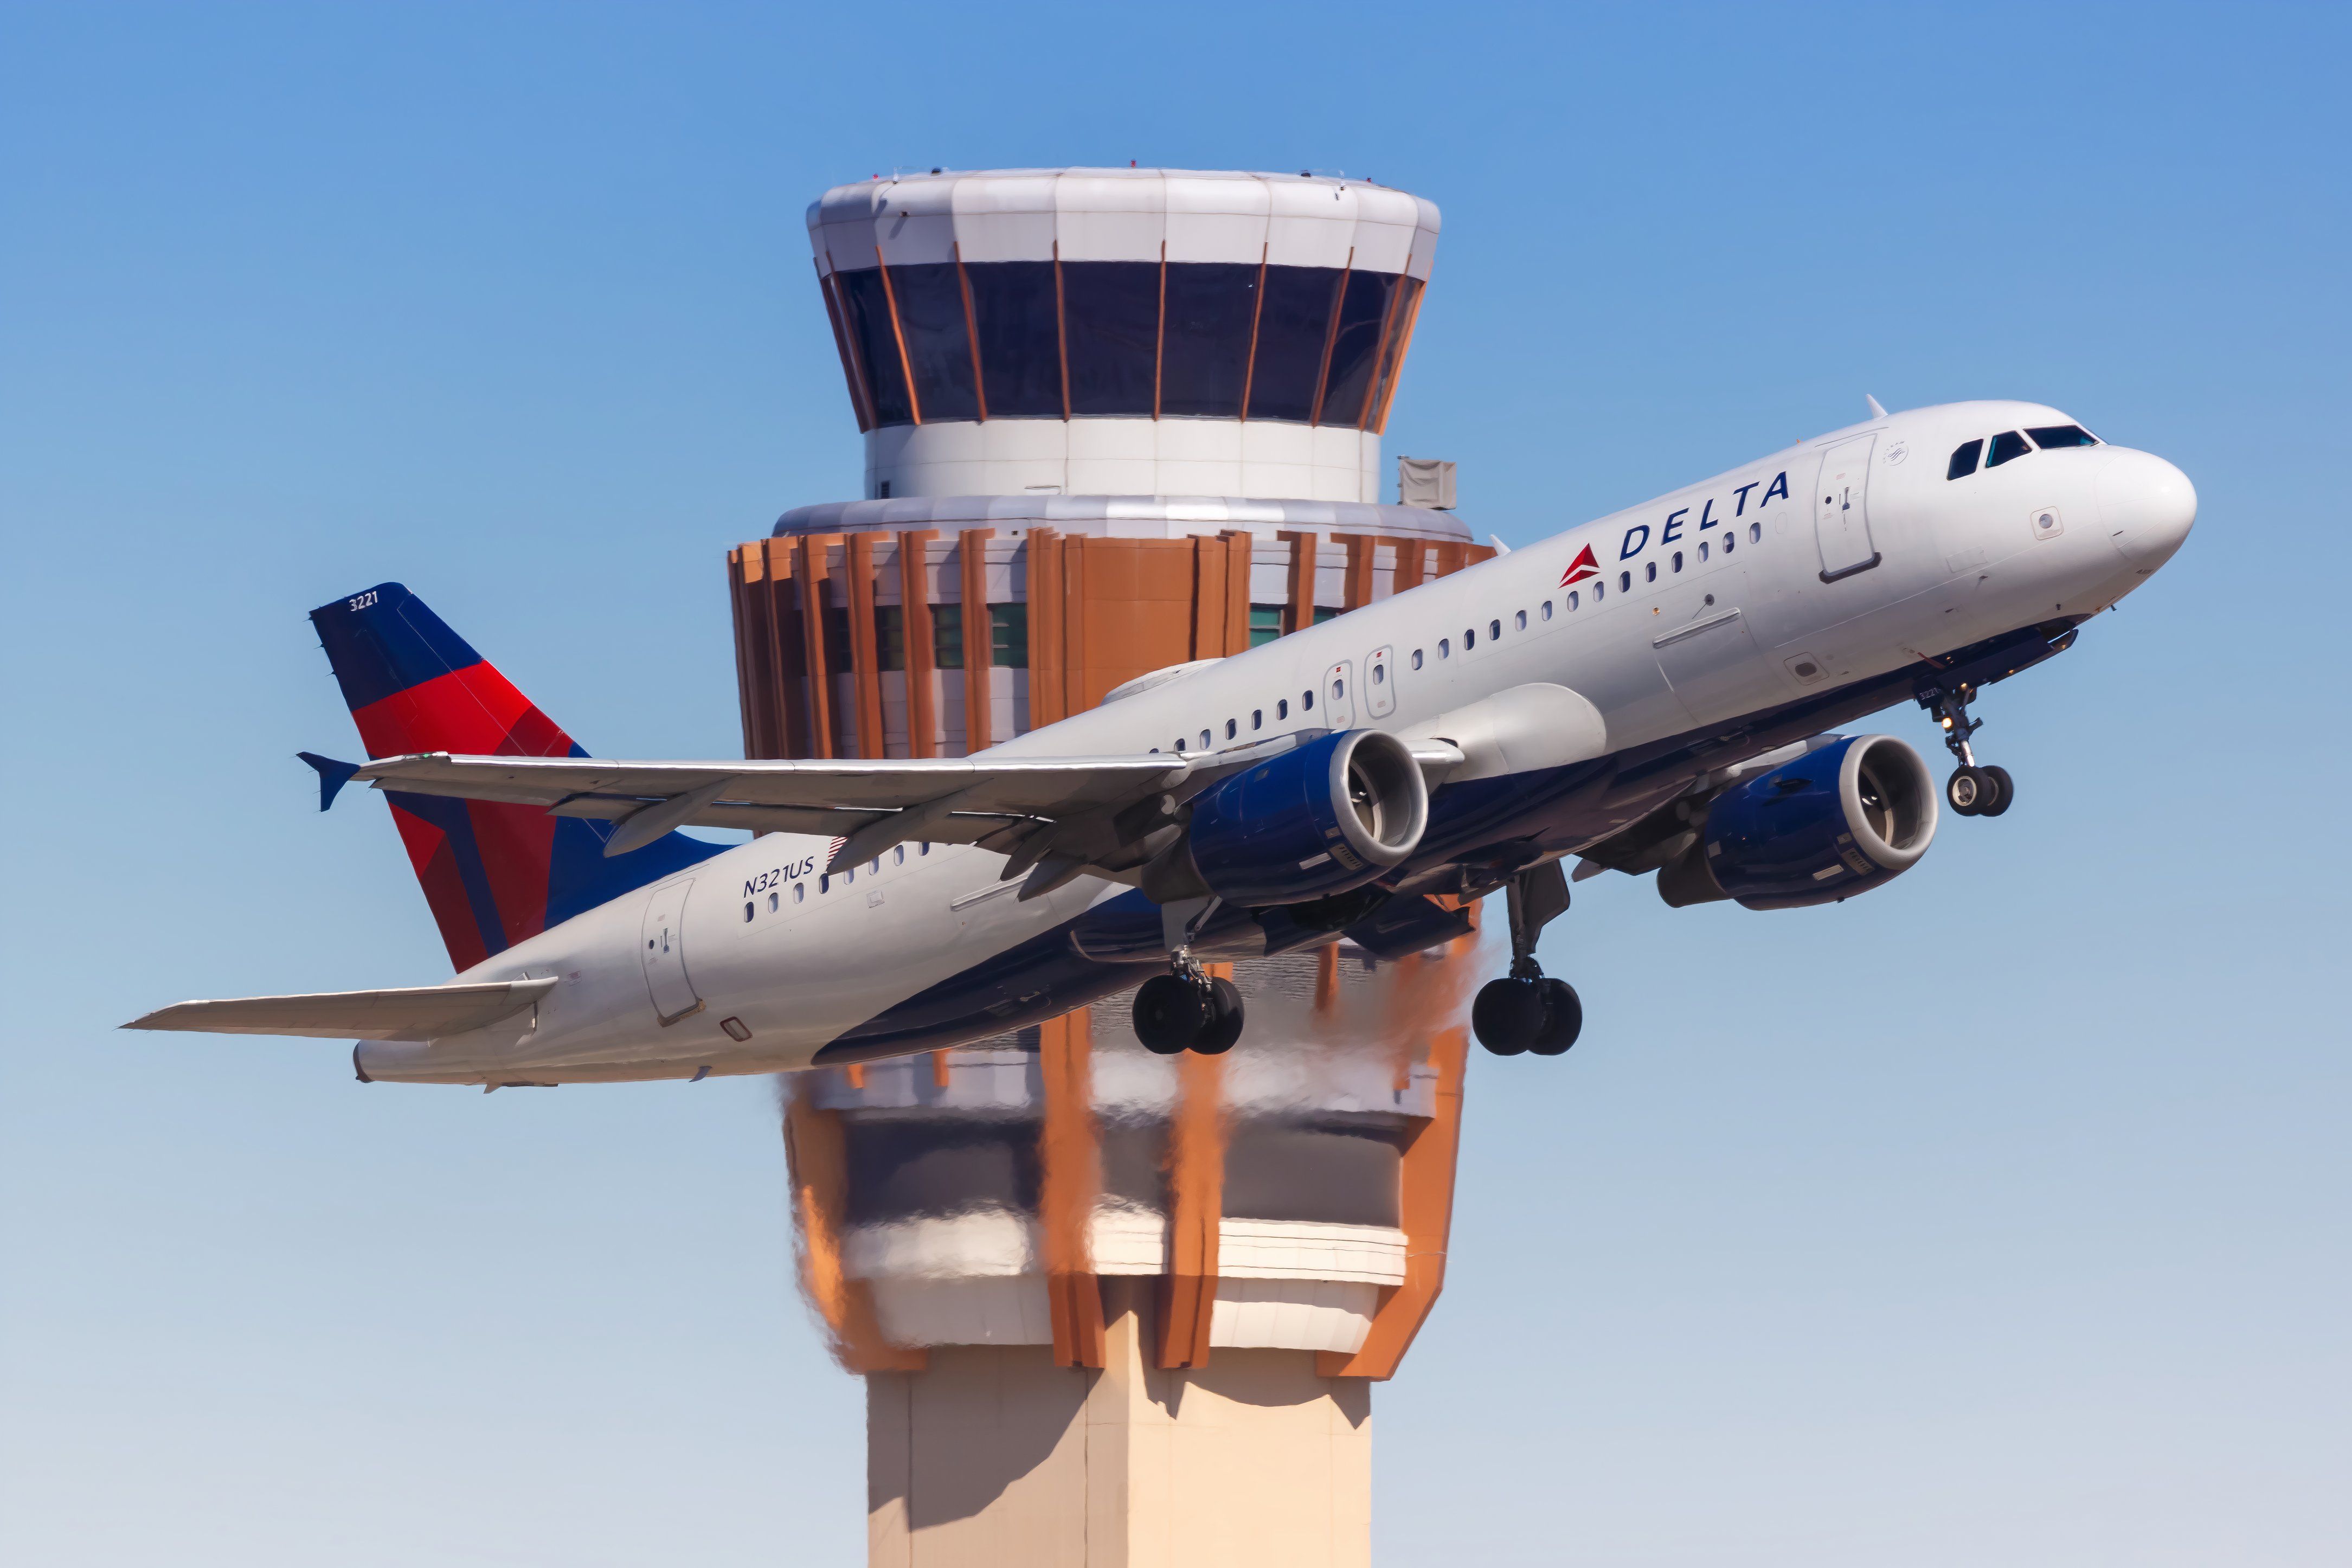 A Delta Air Lines Airbus A320 airplane at Phoenix airport (PHX) in the United States.